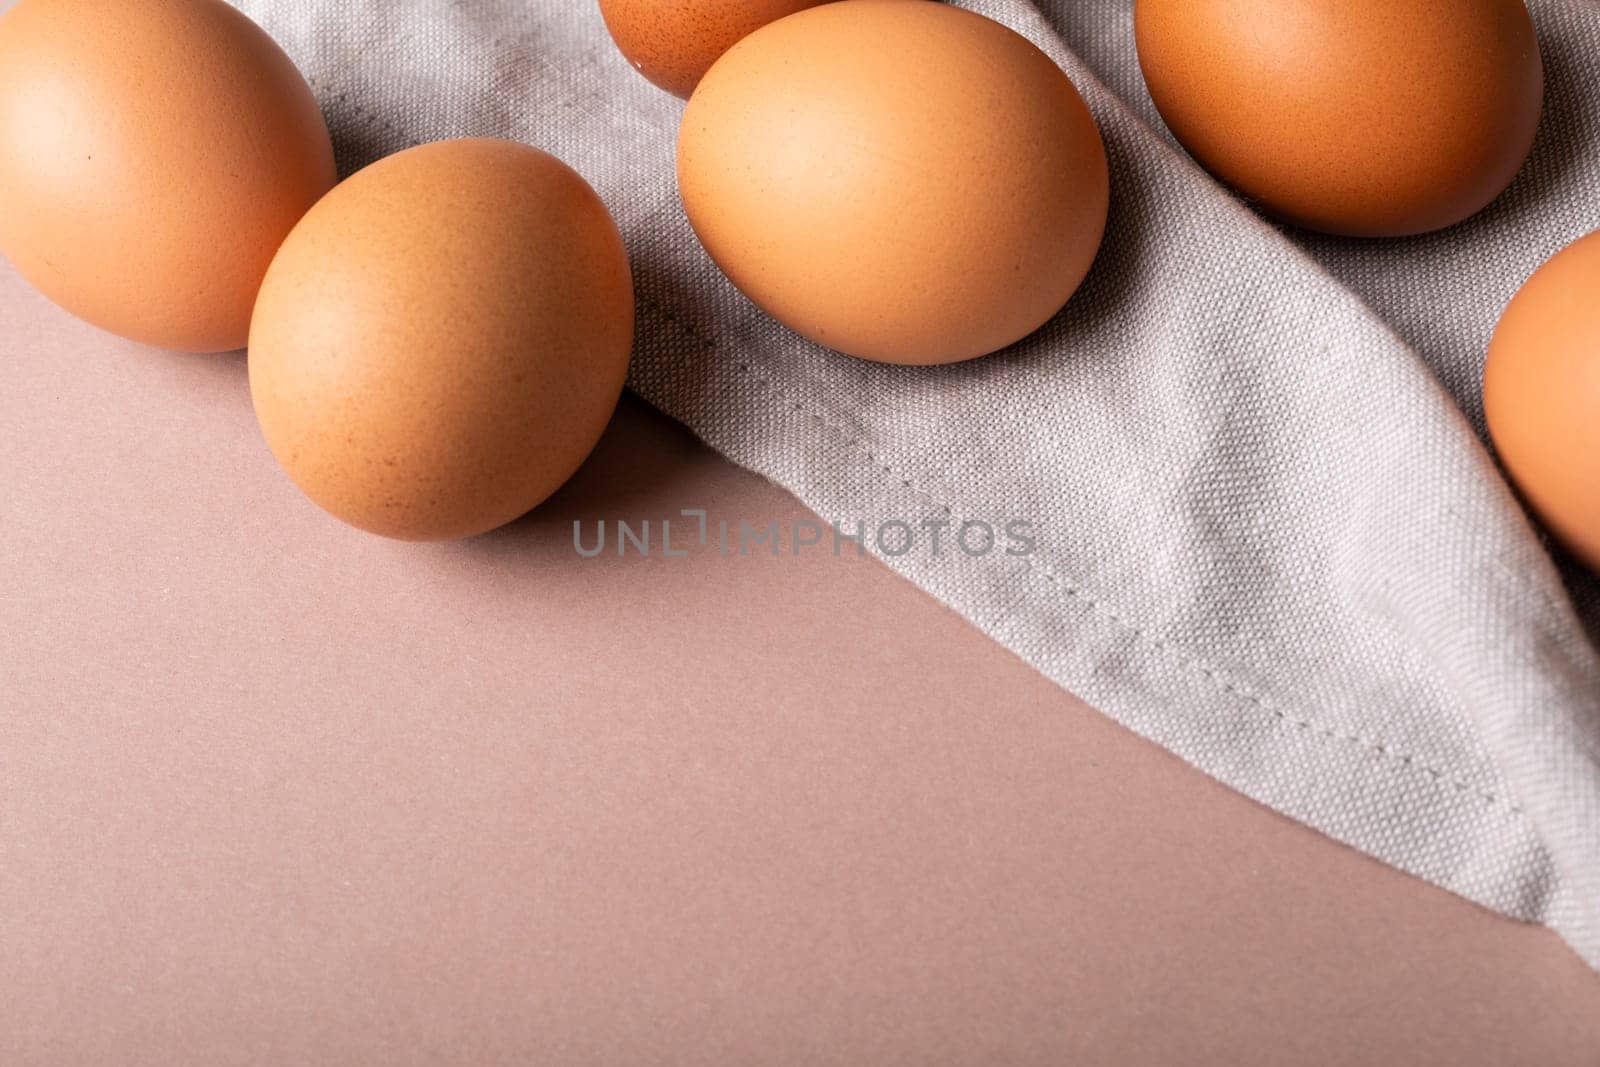 Close-up high angle view of fresh brown eggs and gray napkin over colored background with copy space. unaltered, food, healthy eating concept.